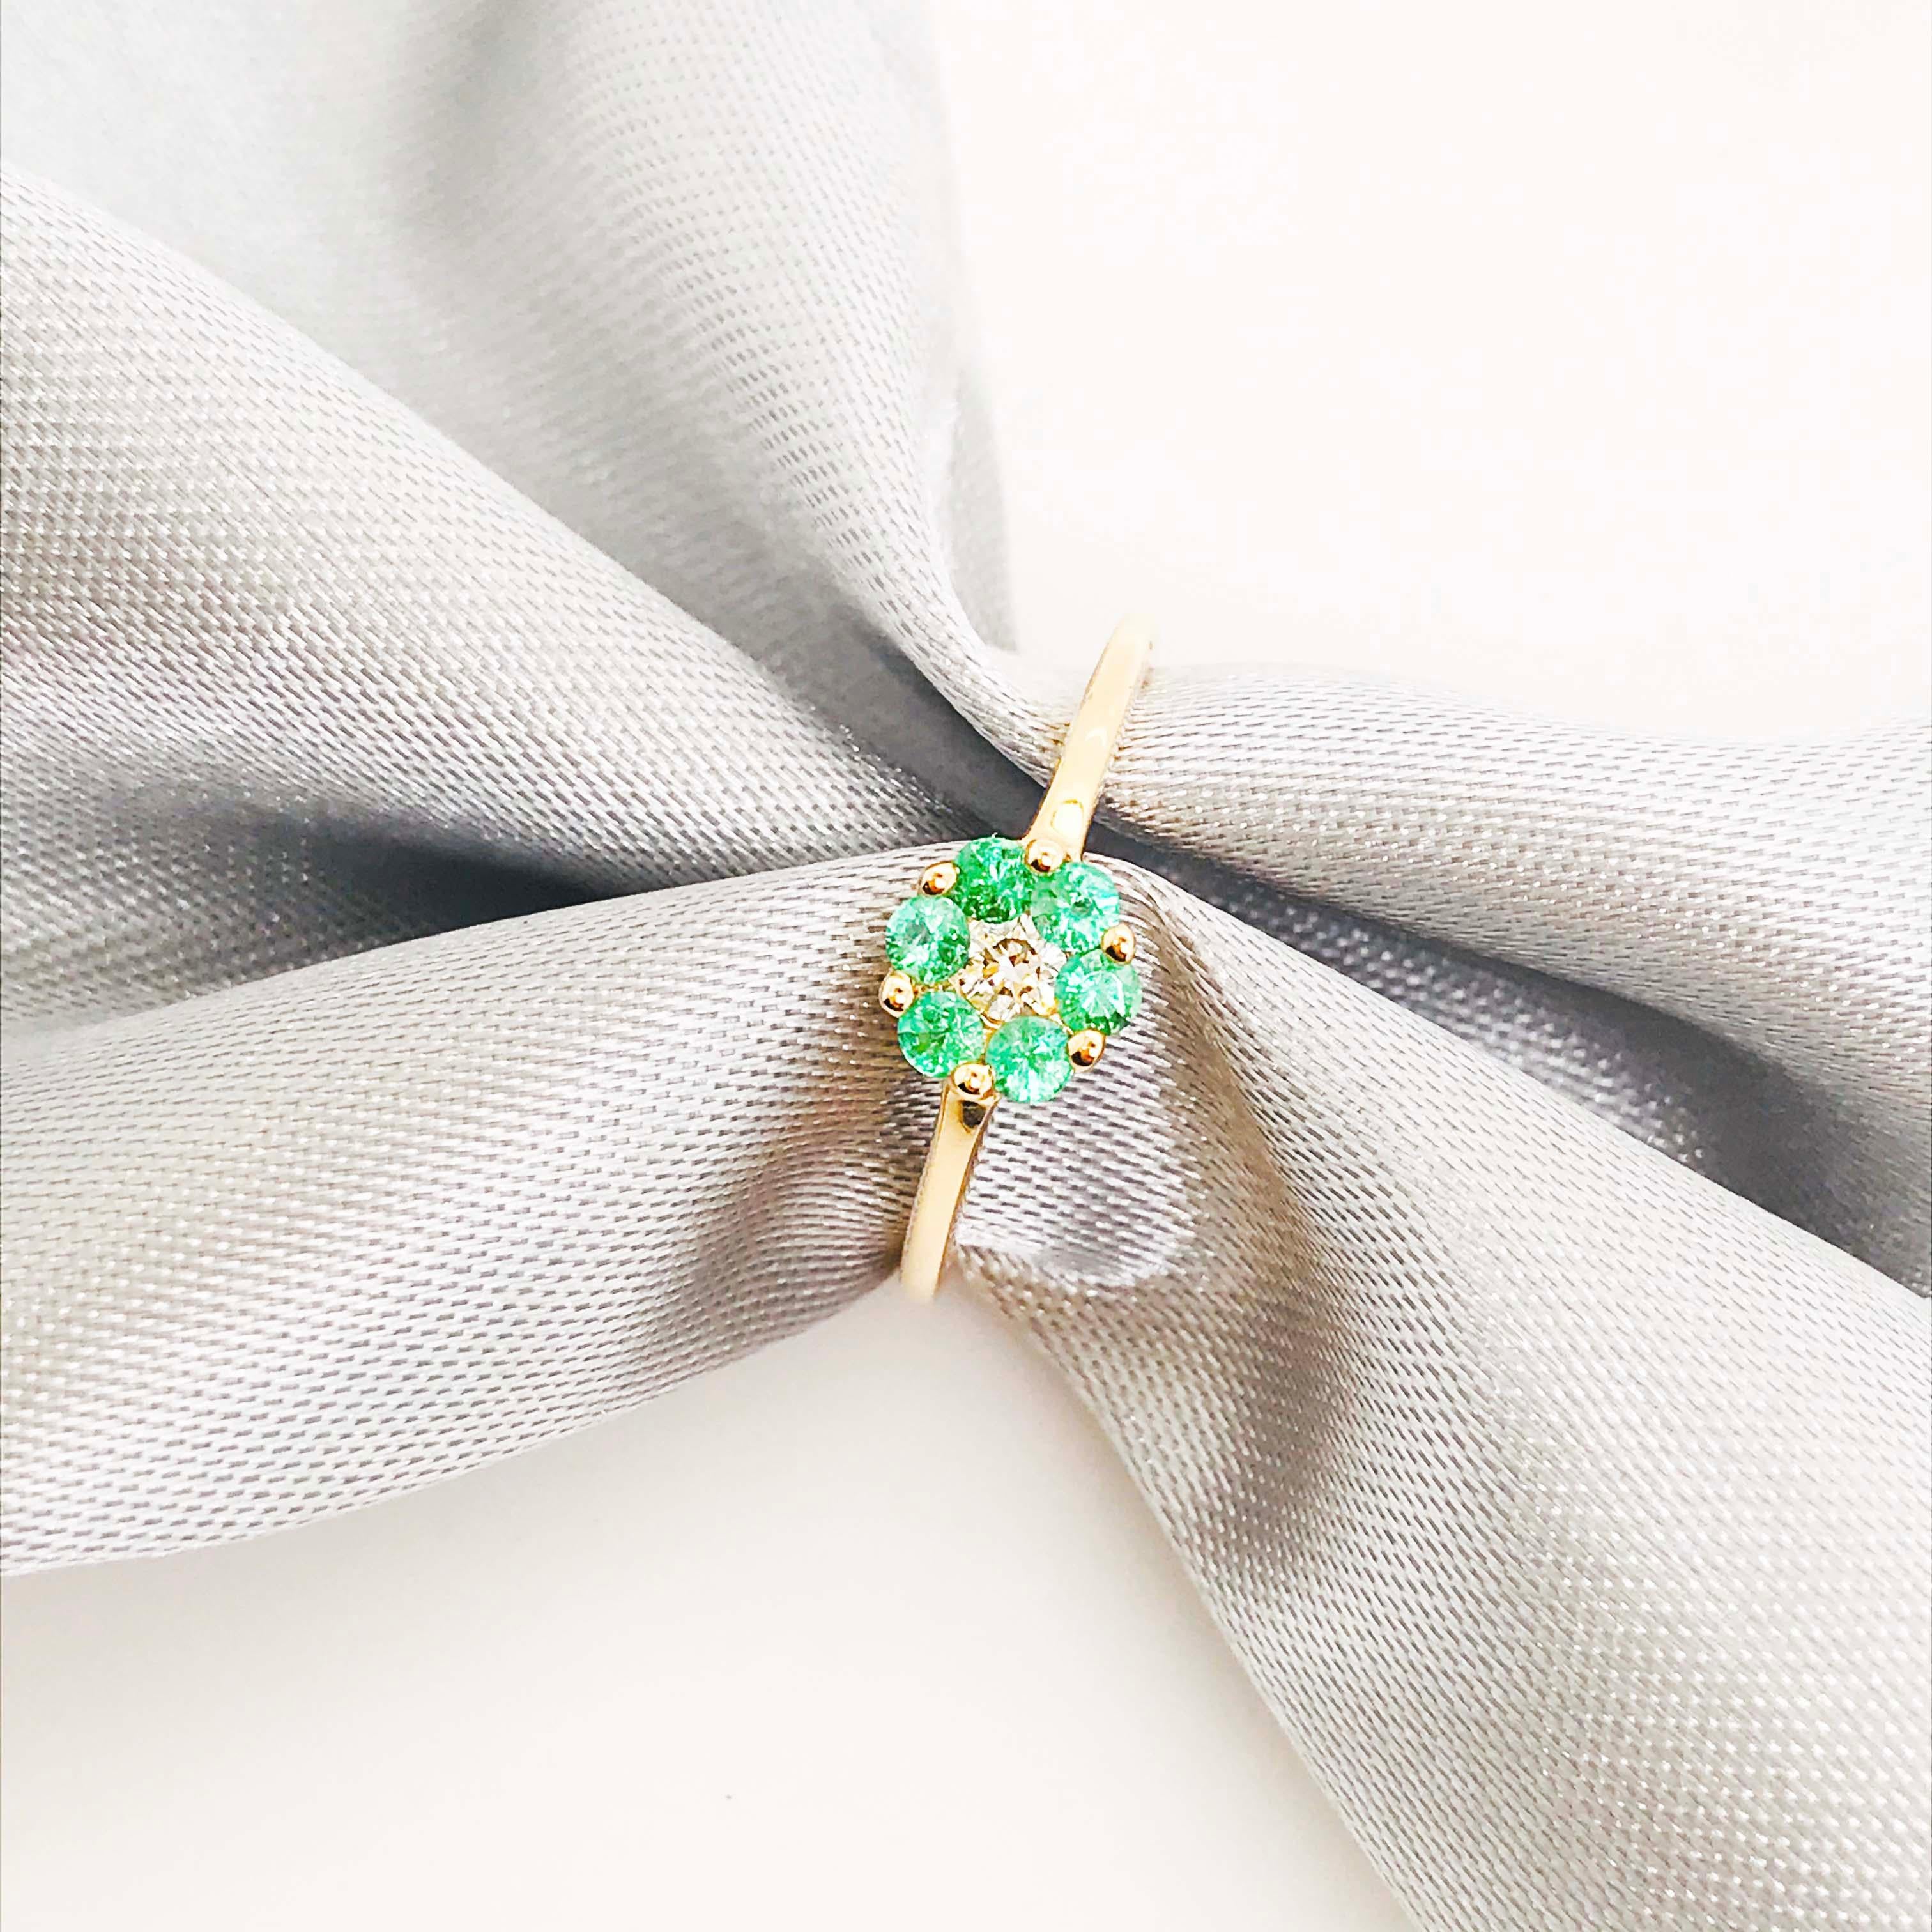 Original Emerald and Diamond Cluster Flower Ring, May Birthstone Ring 6